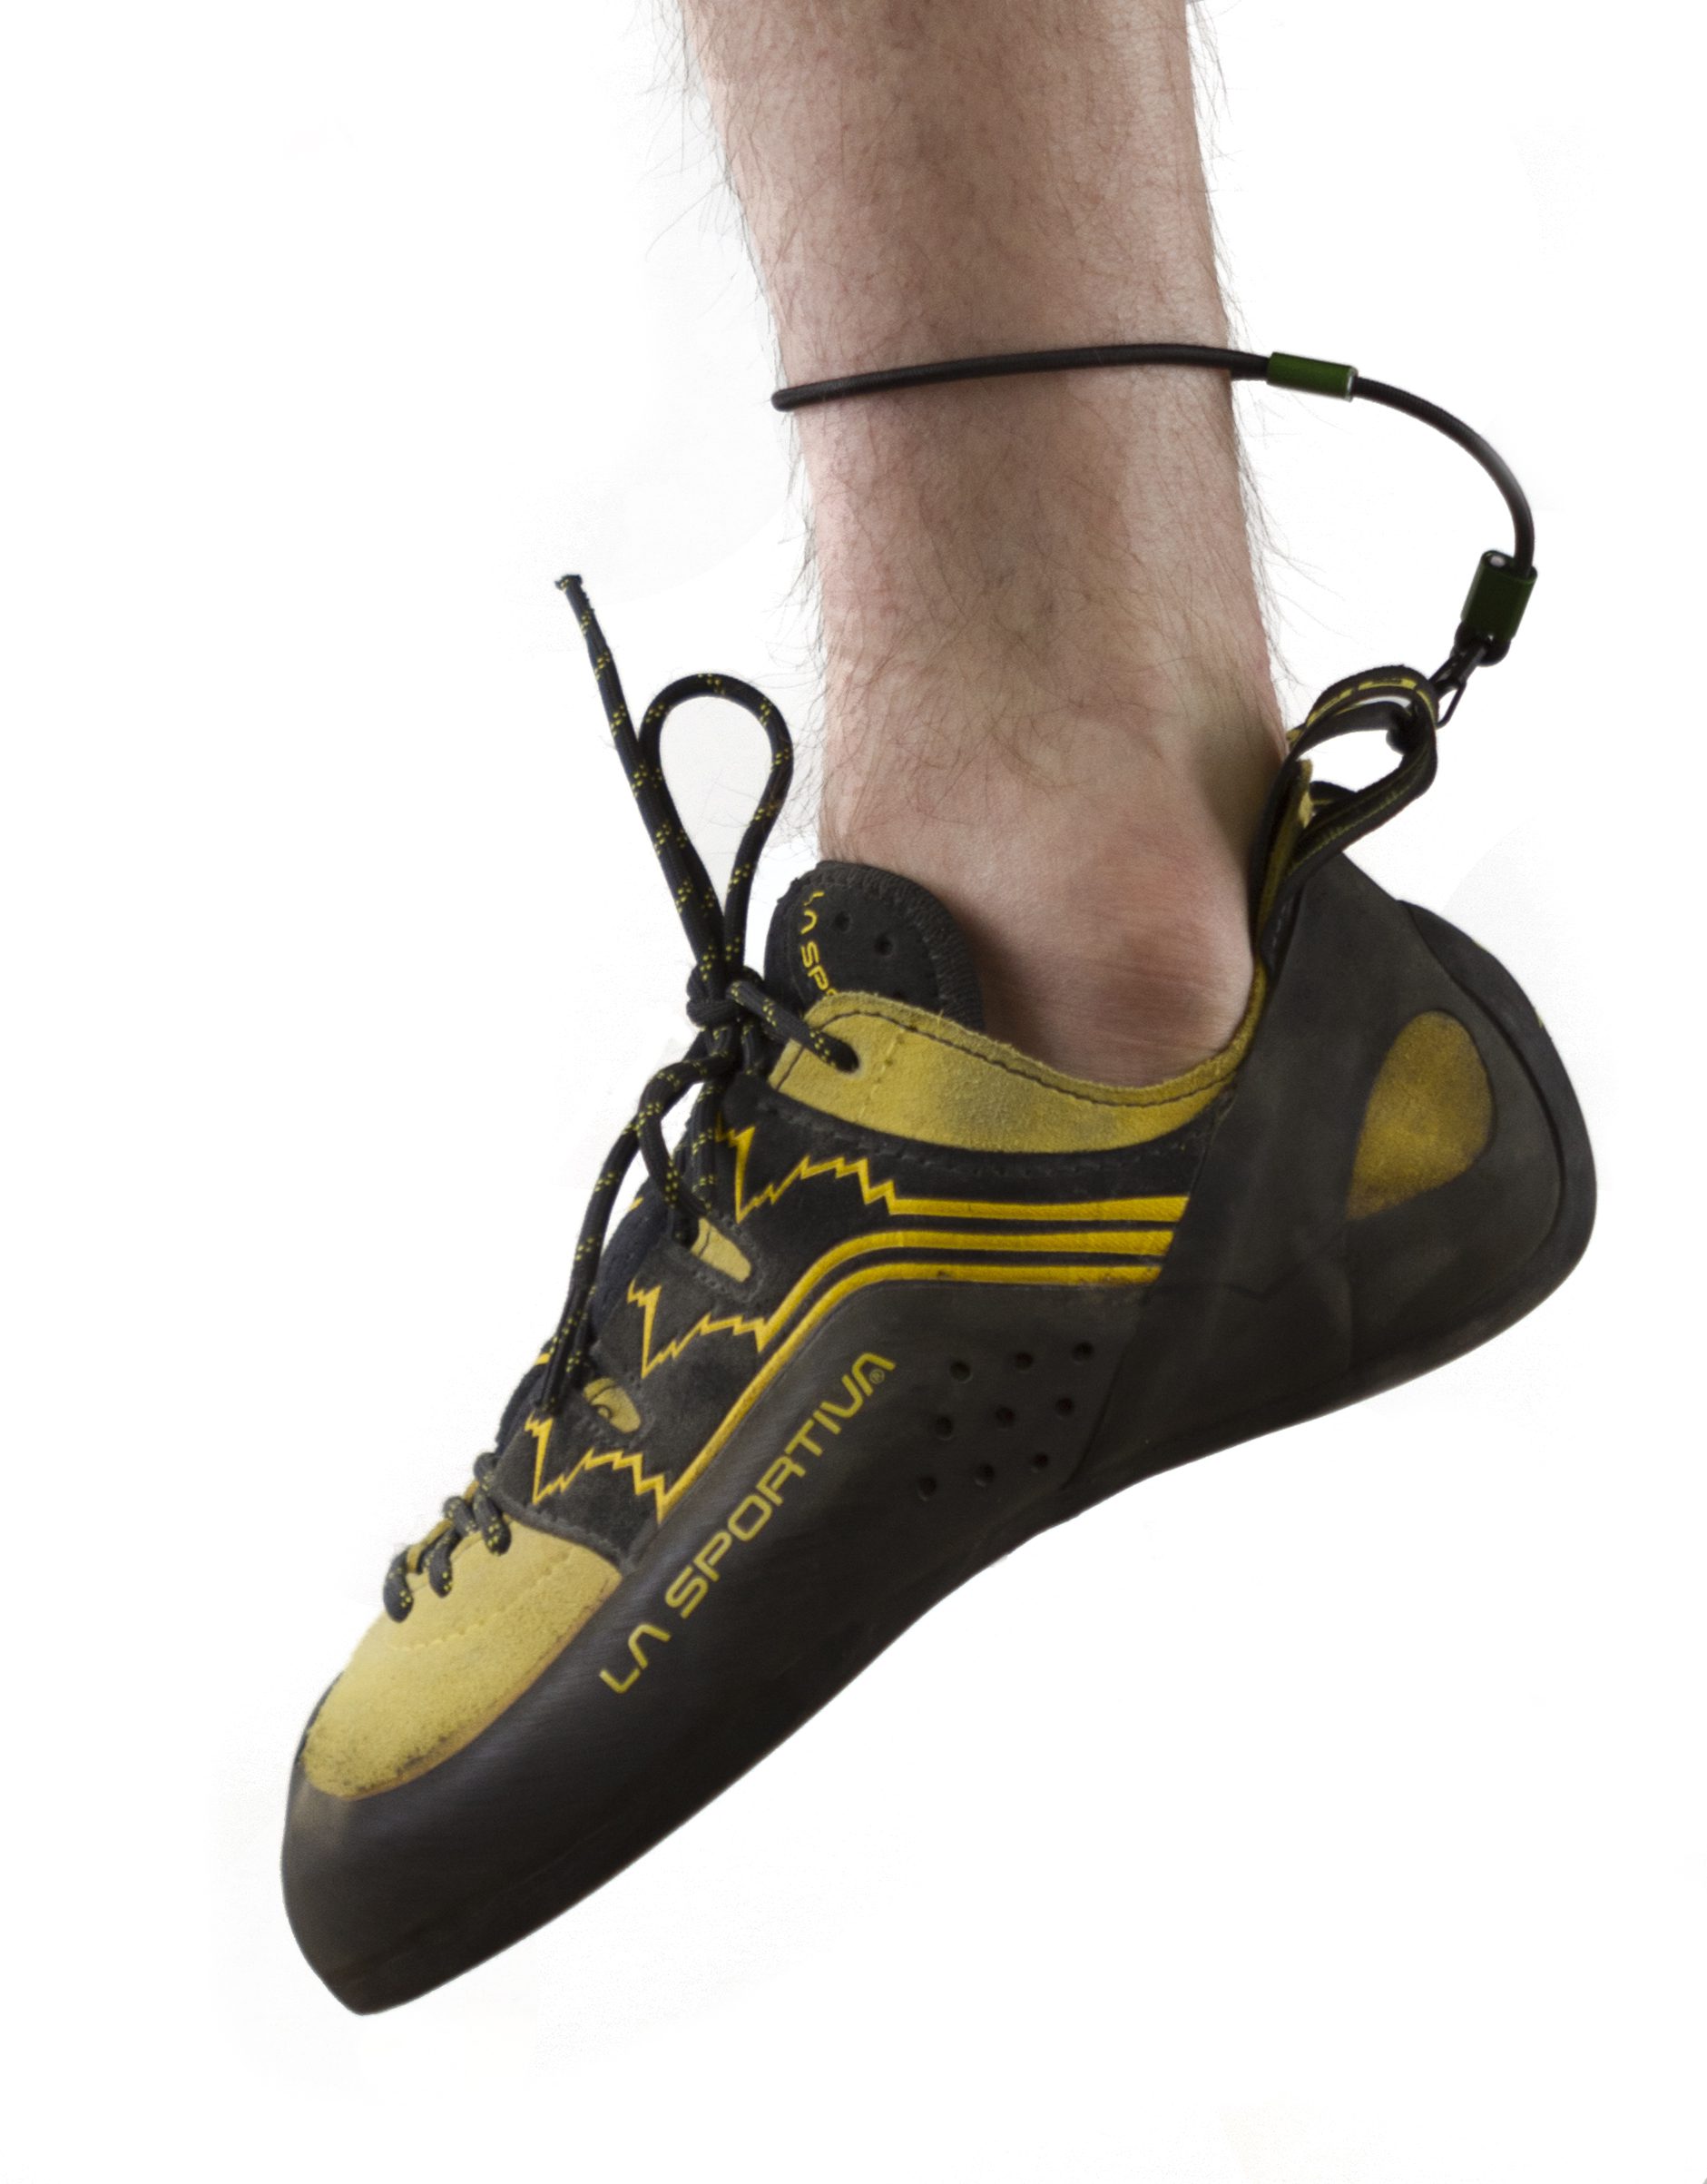 climbing shoes for multi pitch